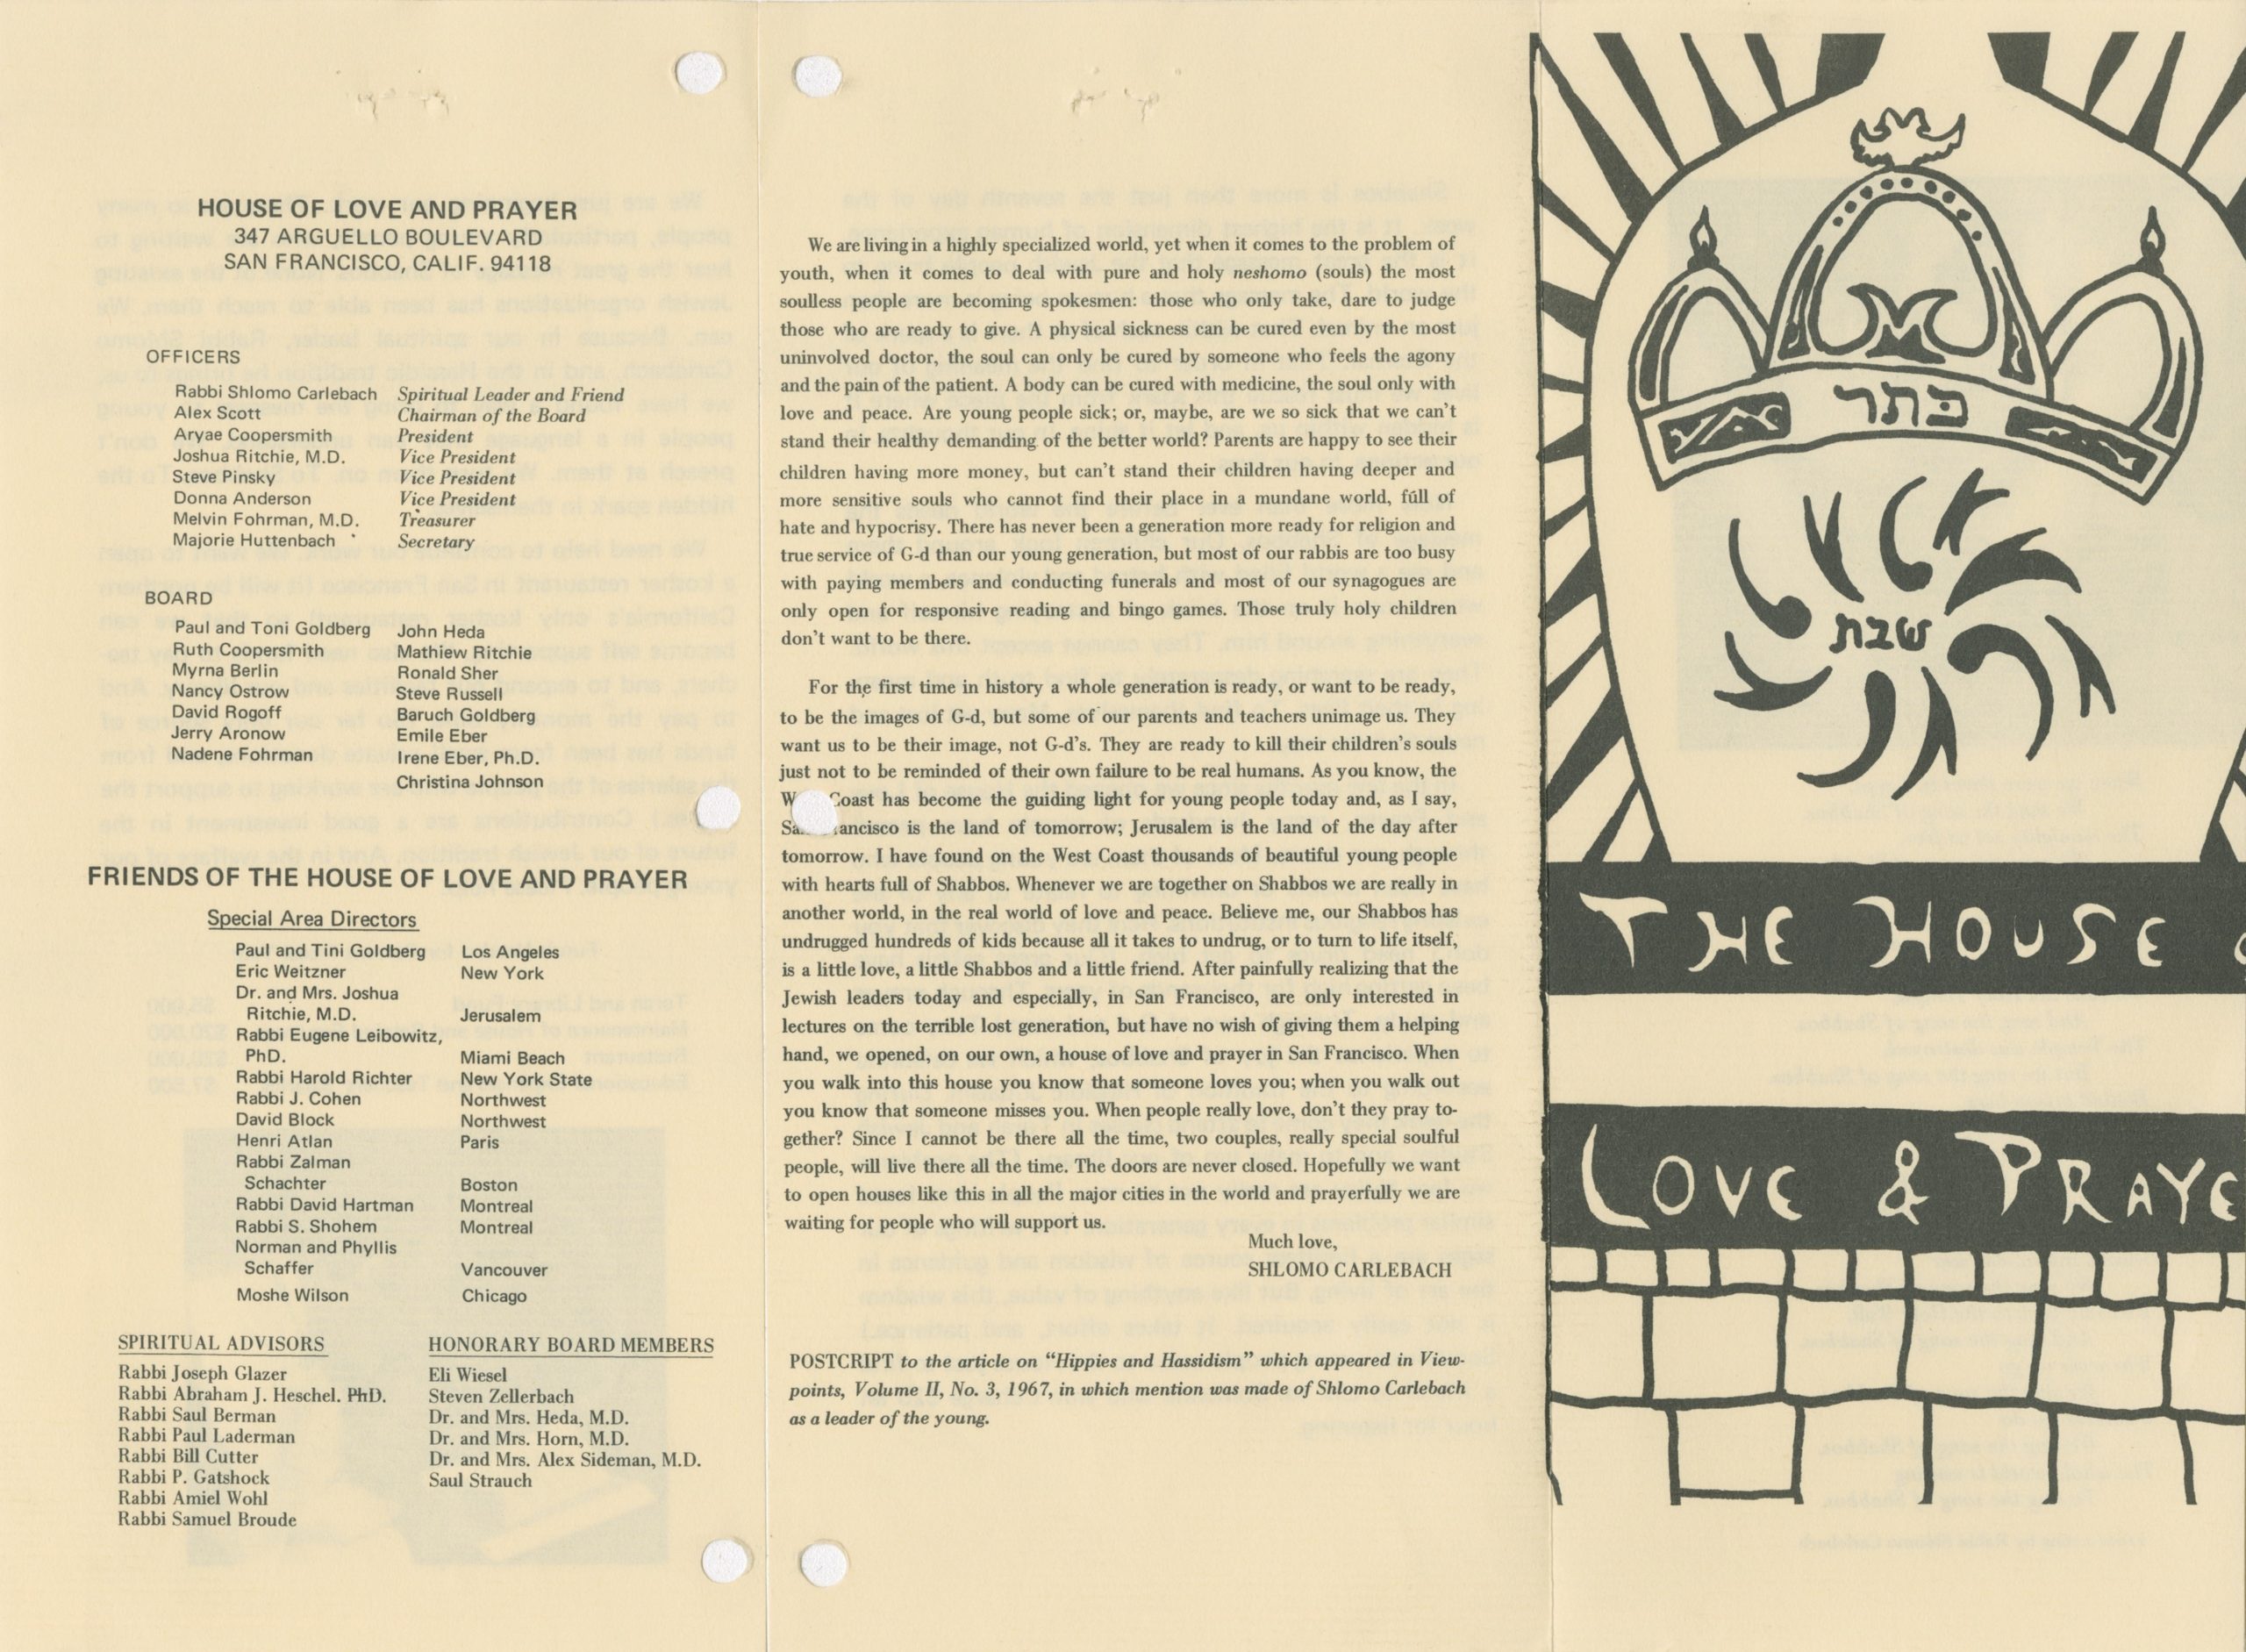 The first part of a brochure advertising the House of Love and Prayer, 1968
